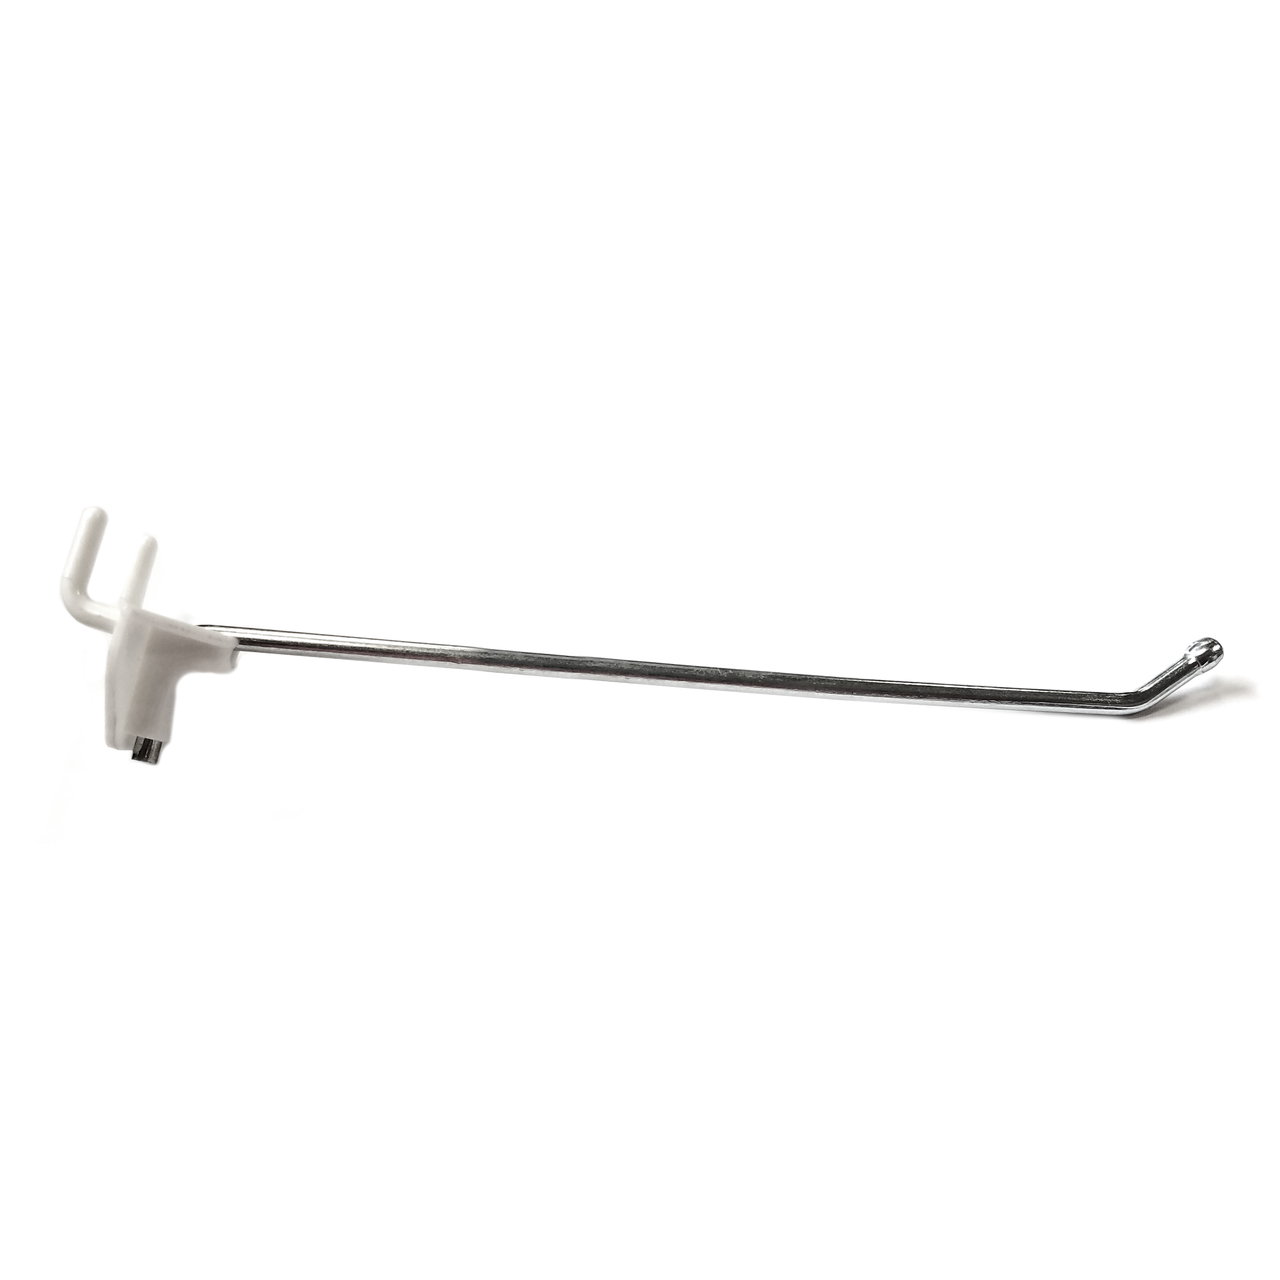 10 inch Chrome Peg Hook for Wire Grid